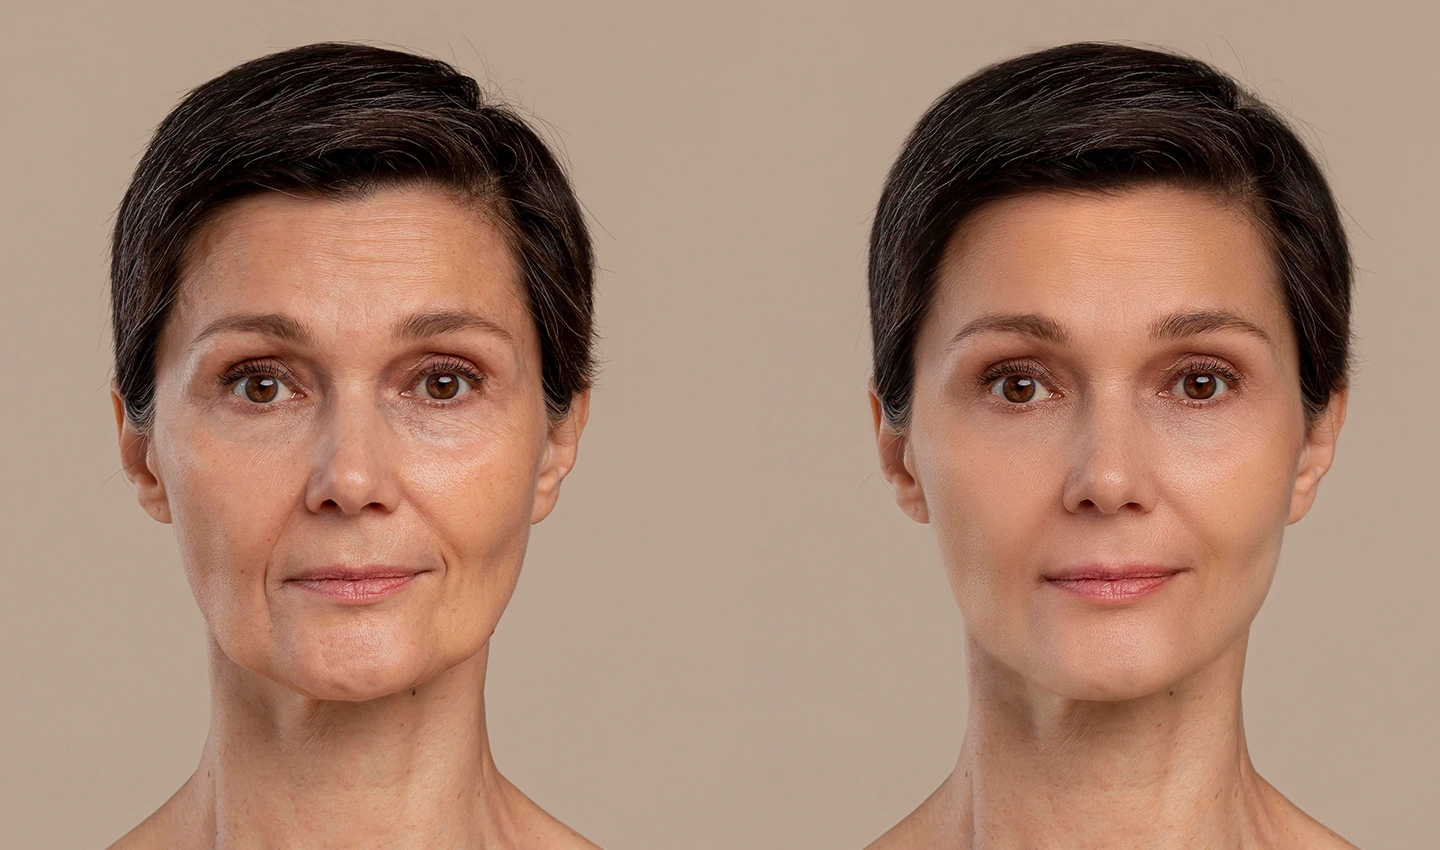 Facelift Before and After Photos - Analyzing Results and Setting Realistic Expectations